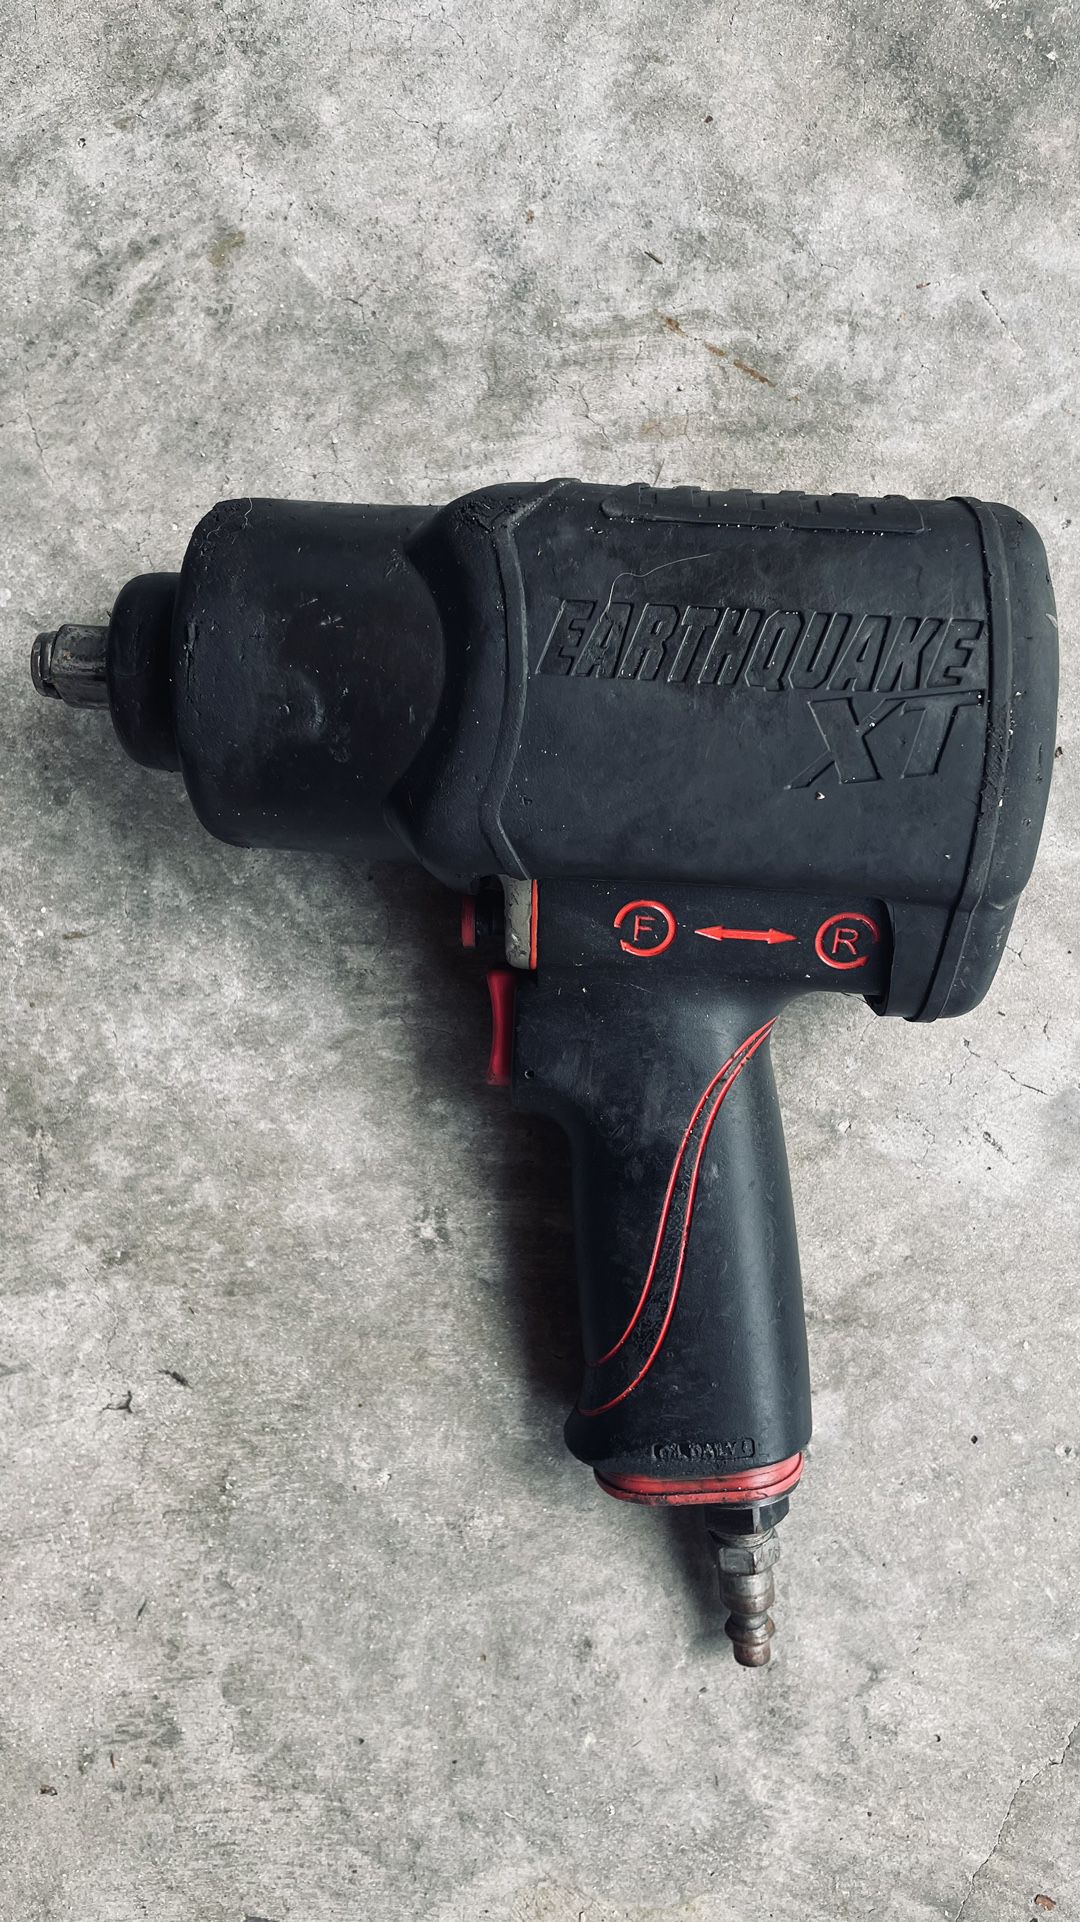 Air impact wrench $125.00 CASH, TEXT FOR PRICES. 